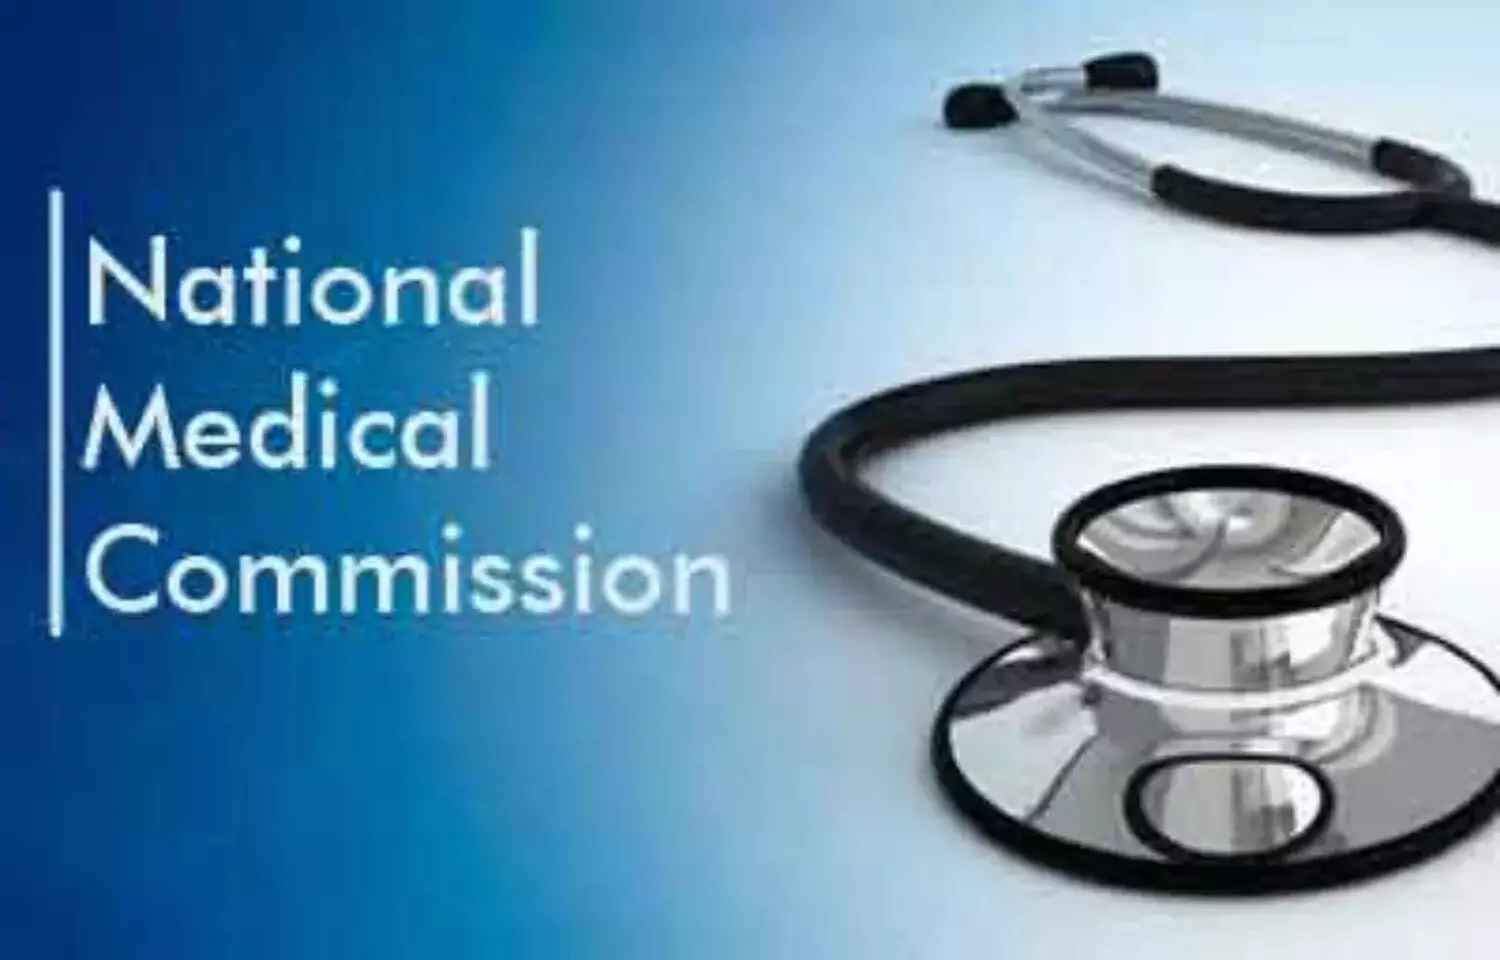 COVID 19 impact: NMC introduces module on Online Learning and Assessment in MBBS Curriculum, details